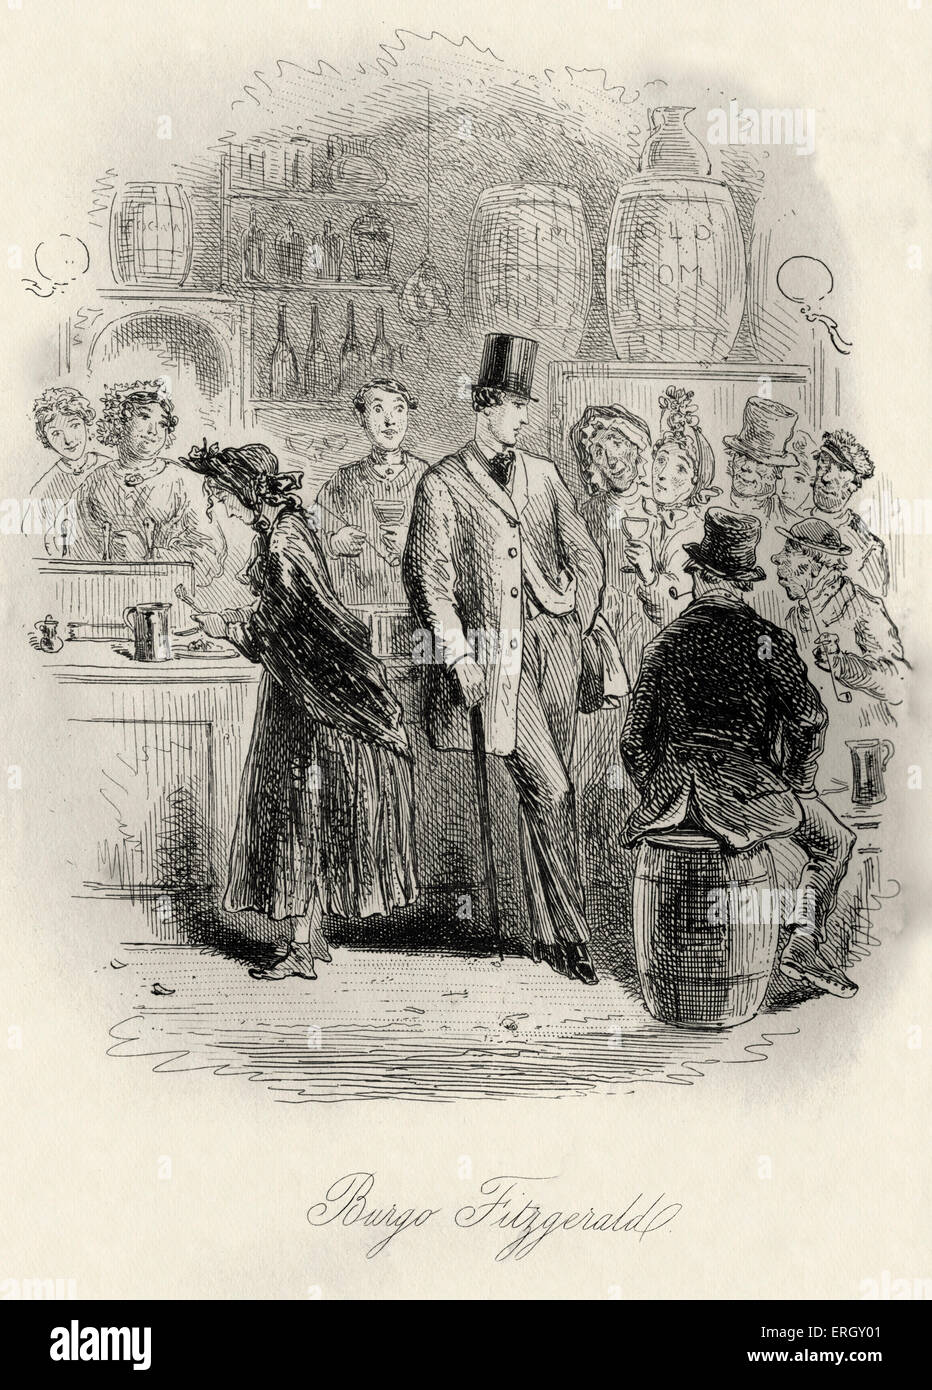 Can you forgive her?' by Anthony Trollope. First published in 1864 and 1865. Caption reads: 'Burgo Fitzgerald' in London. AT: English novelist, 24 April 1815 – 6 December 1882. Illustration by Hablot Knight-Browne (Phiz) and E.Taylor. Stock Photo